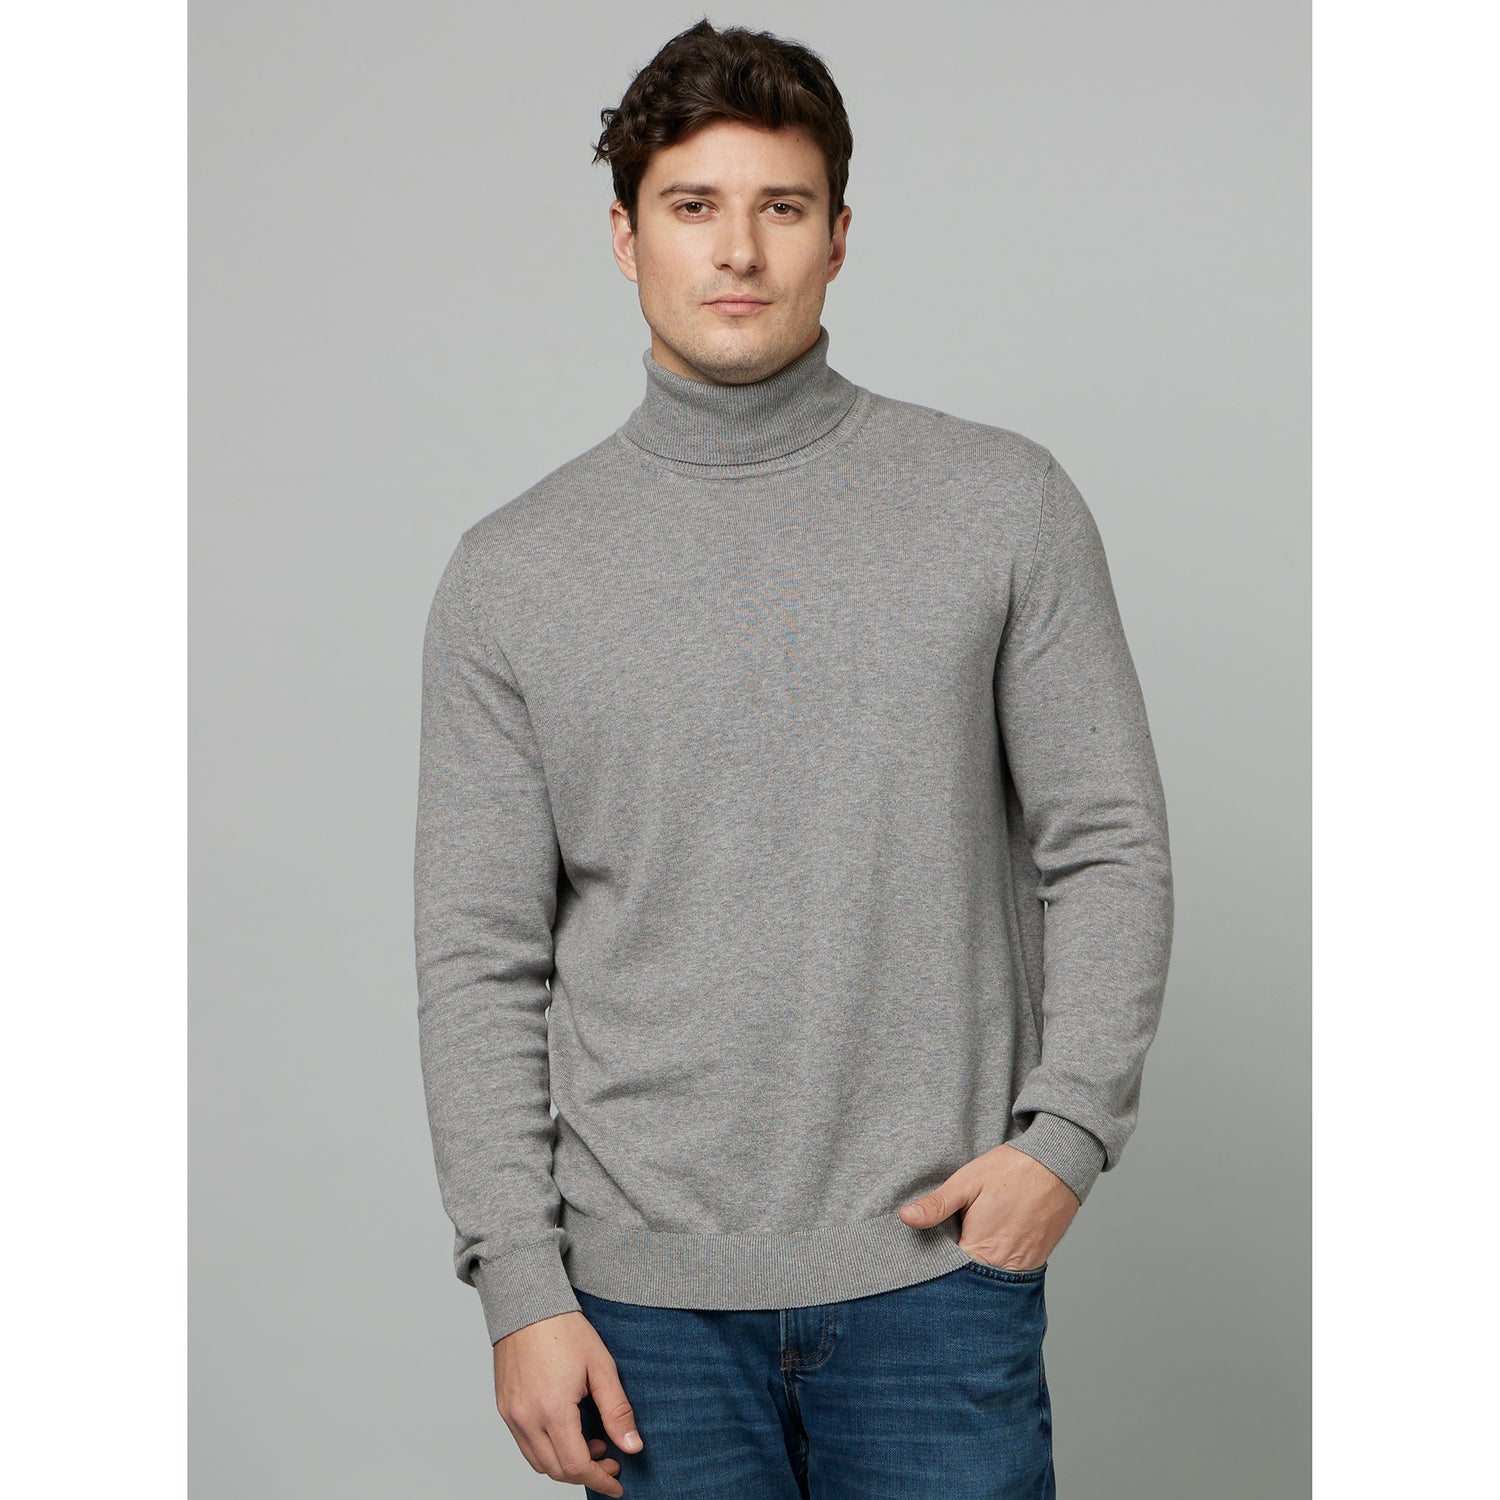 Grey Turtle Neck Full Sleeve Knitted Pullover Sweater (FEROLL)